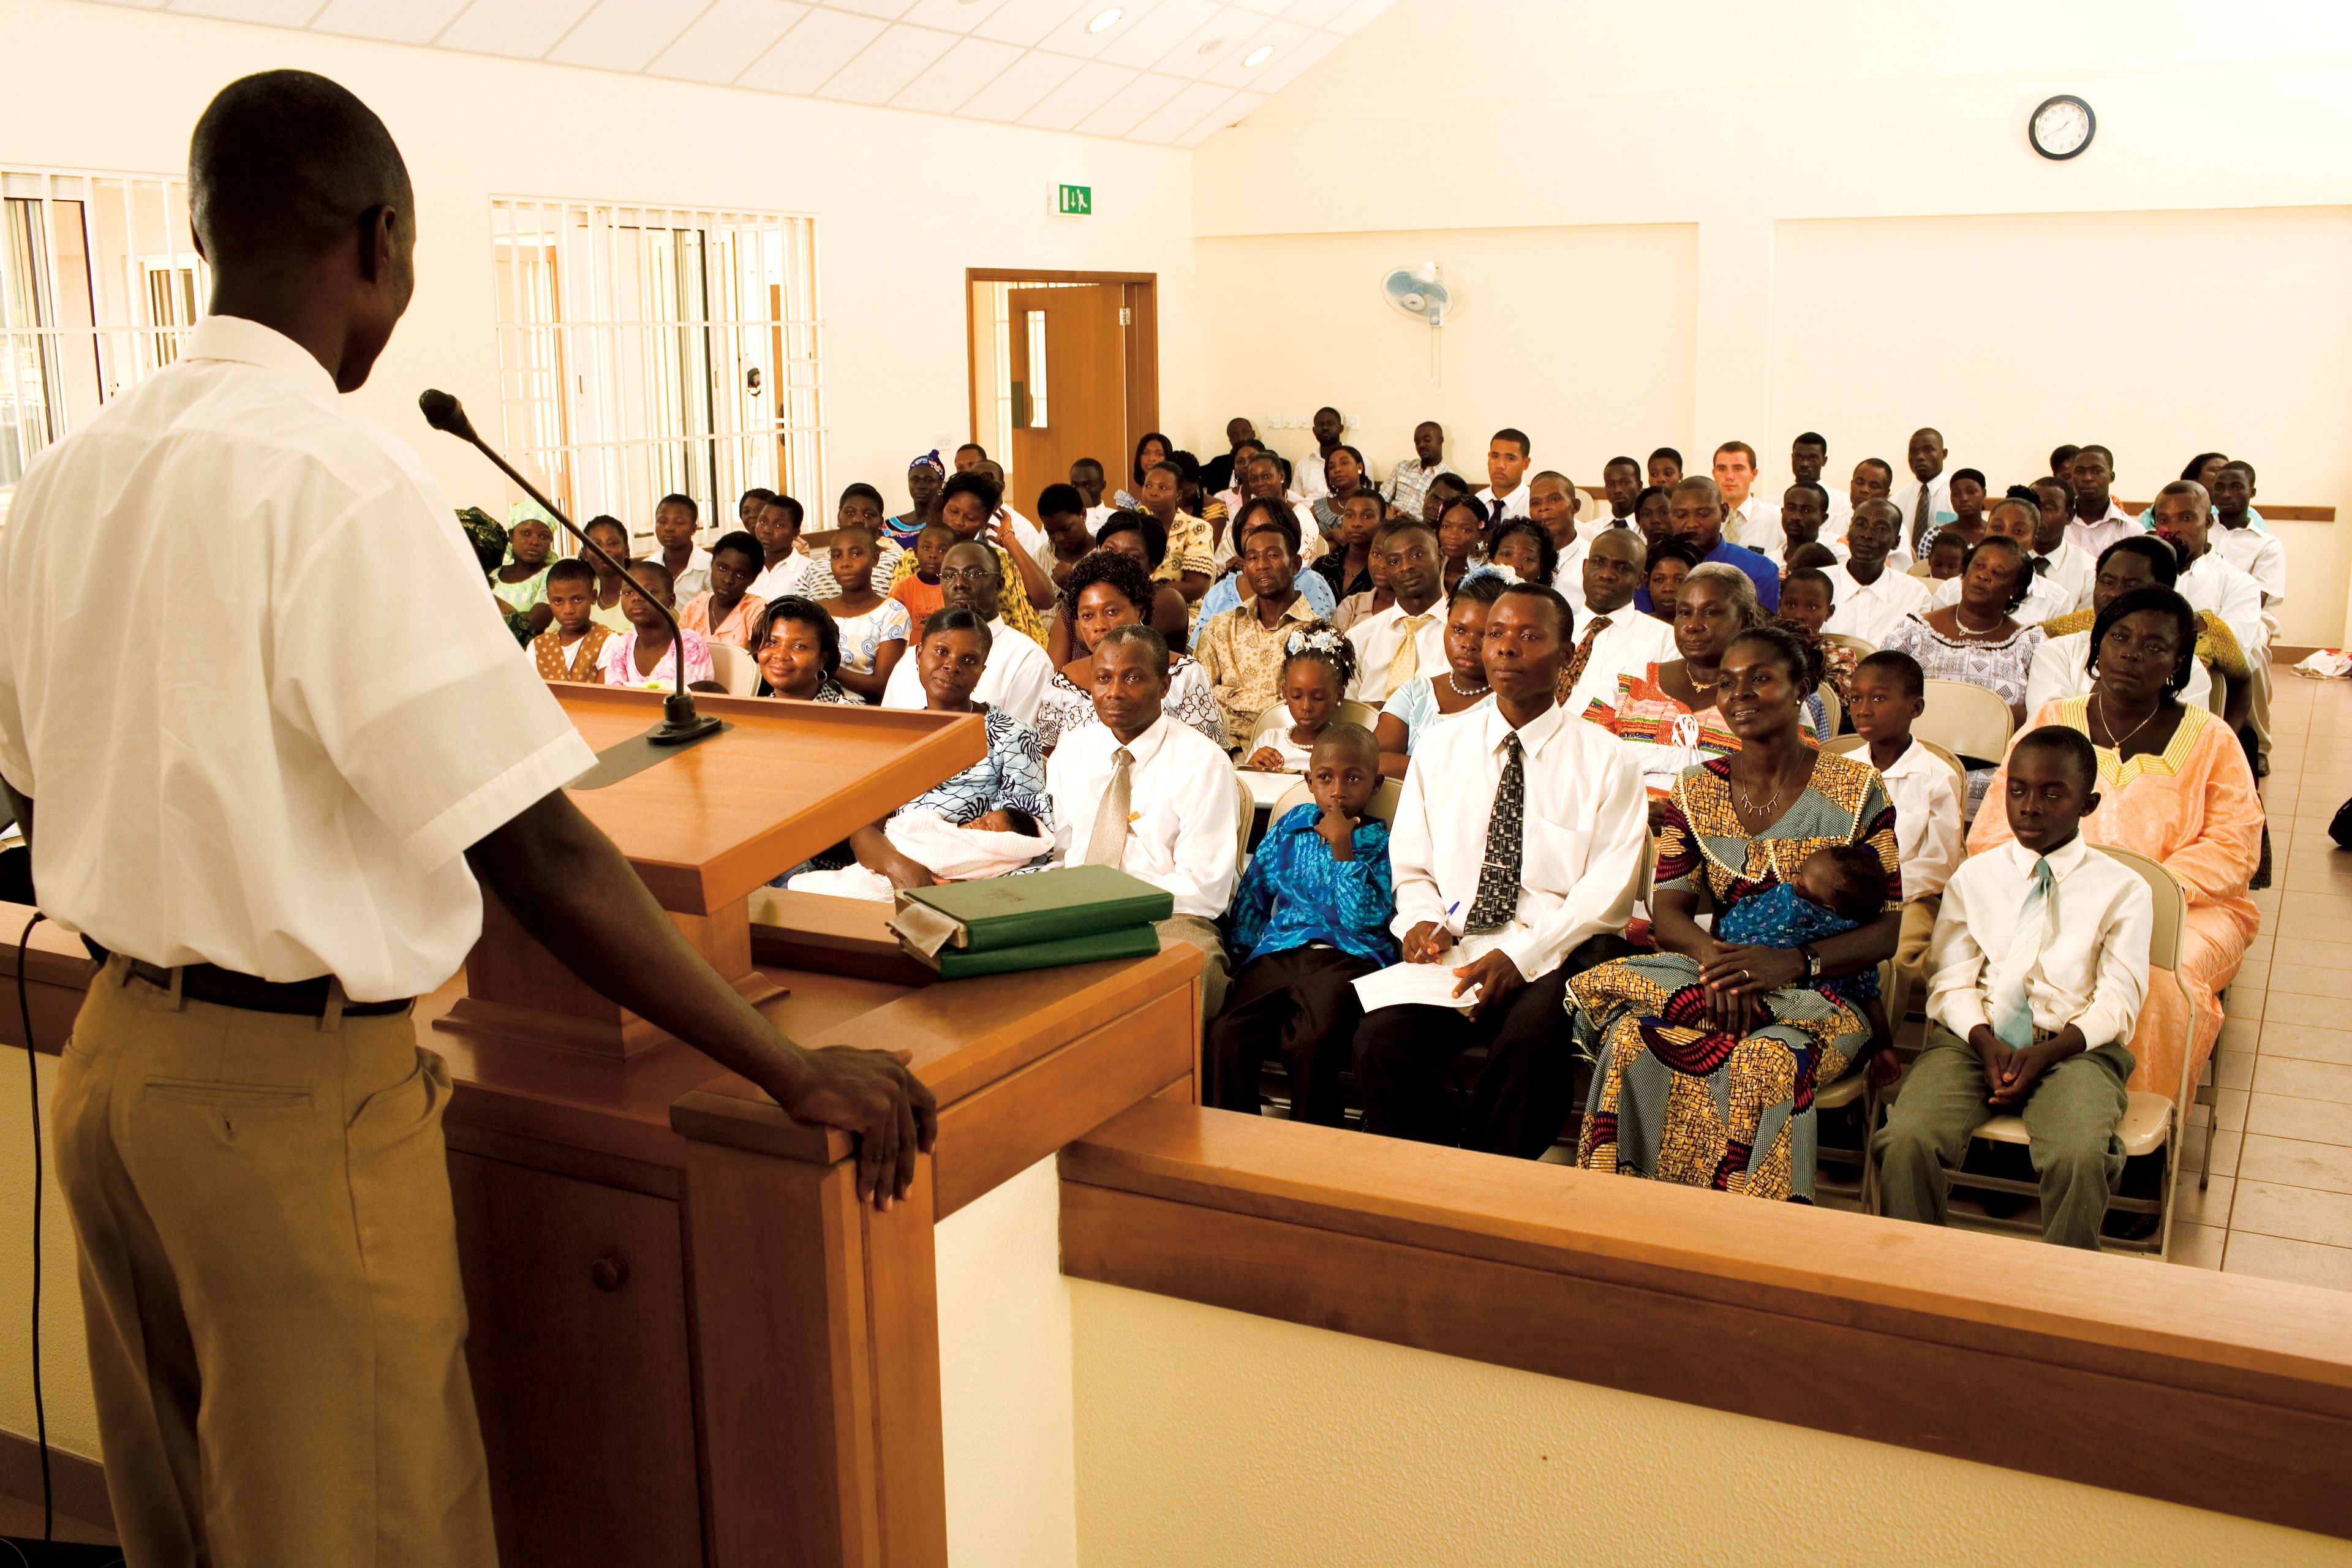 A speaker standing in front of a congregation, giving a talk.